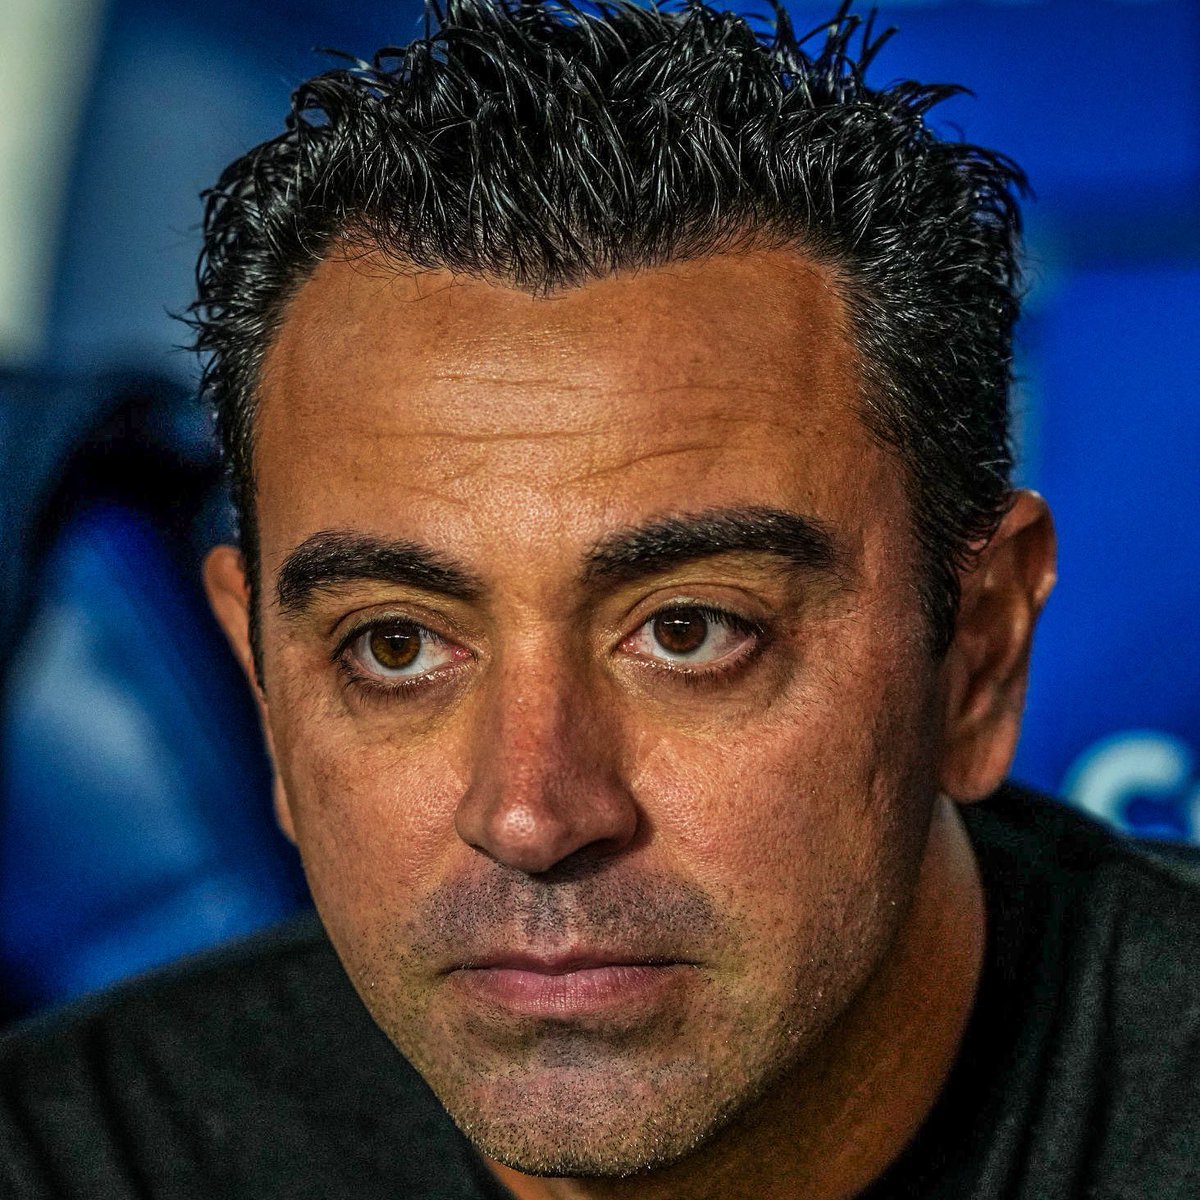 𝐁𝐑𝐄𝐀𝐊𝐈𝐍𝐆: Xavi will STAY as Barcelona manager until 2025. Source: @ffpolo